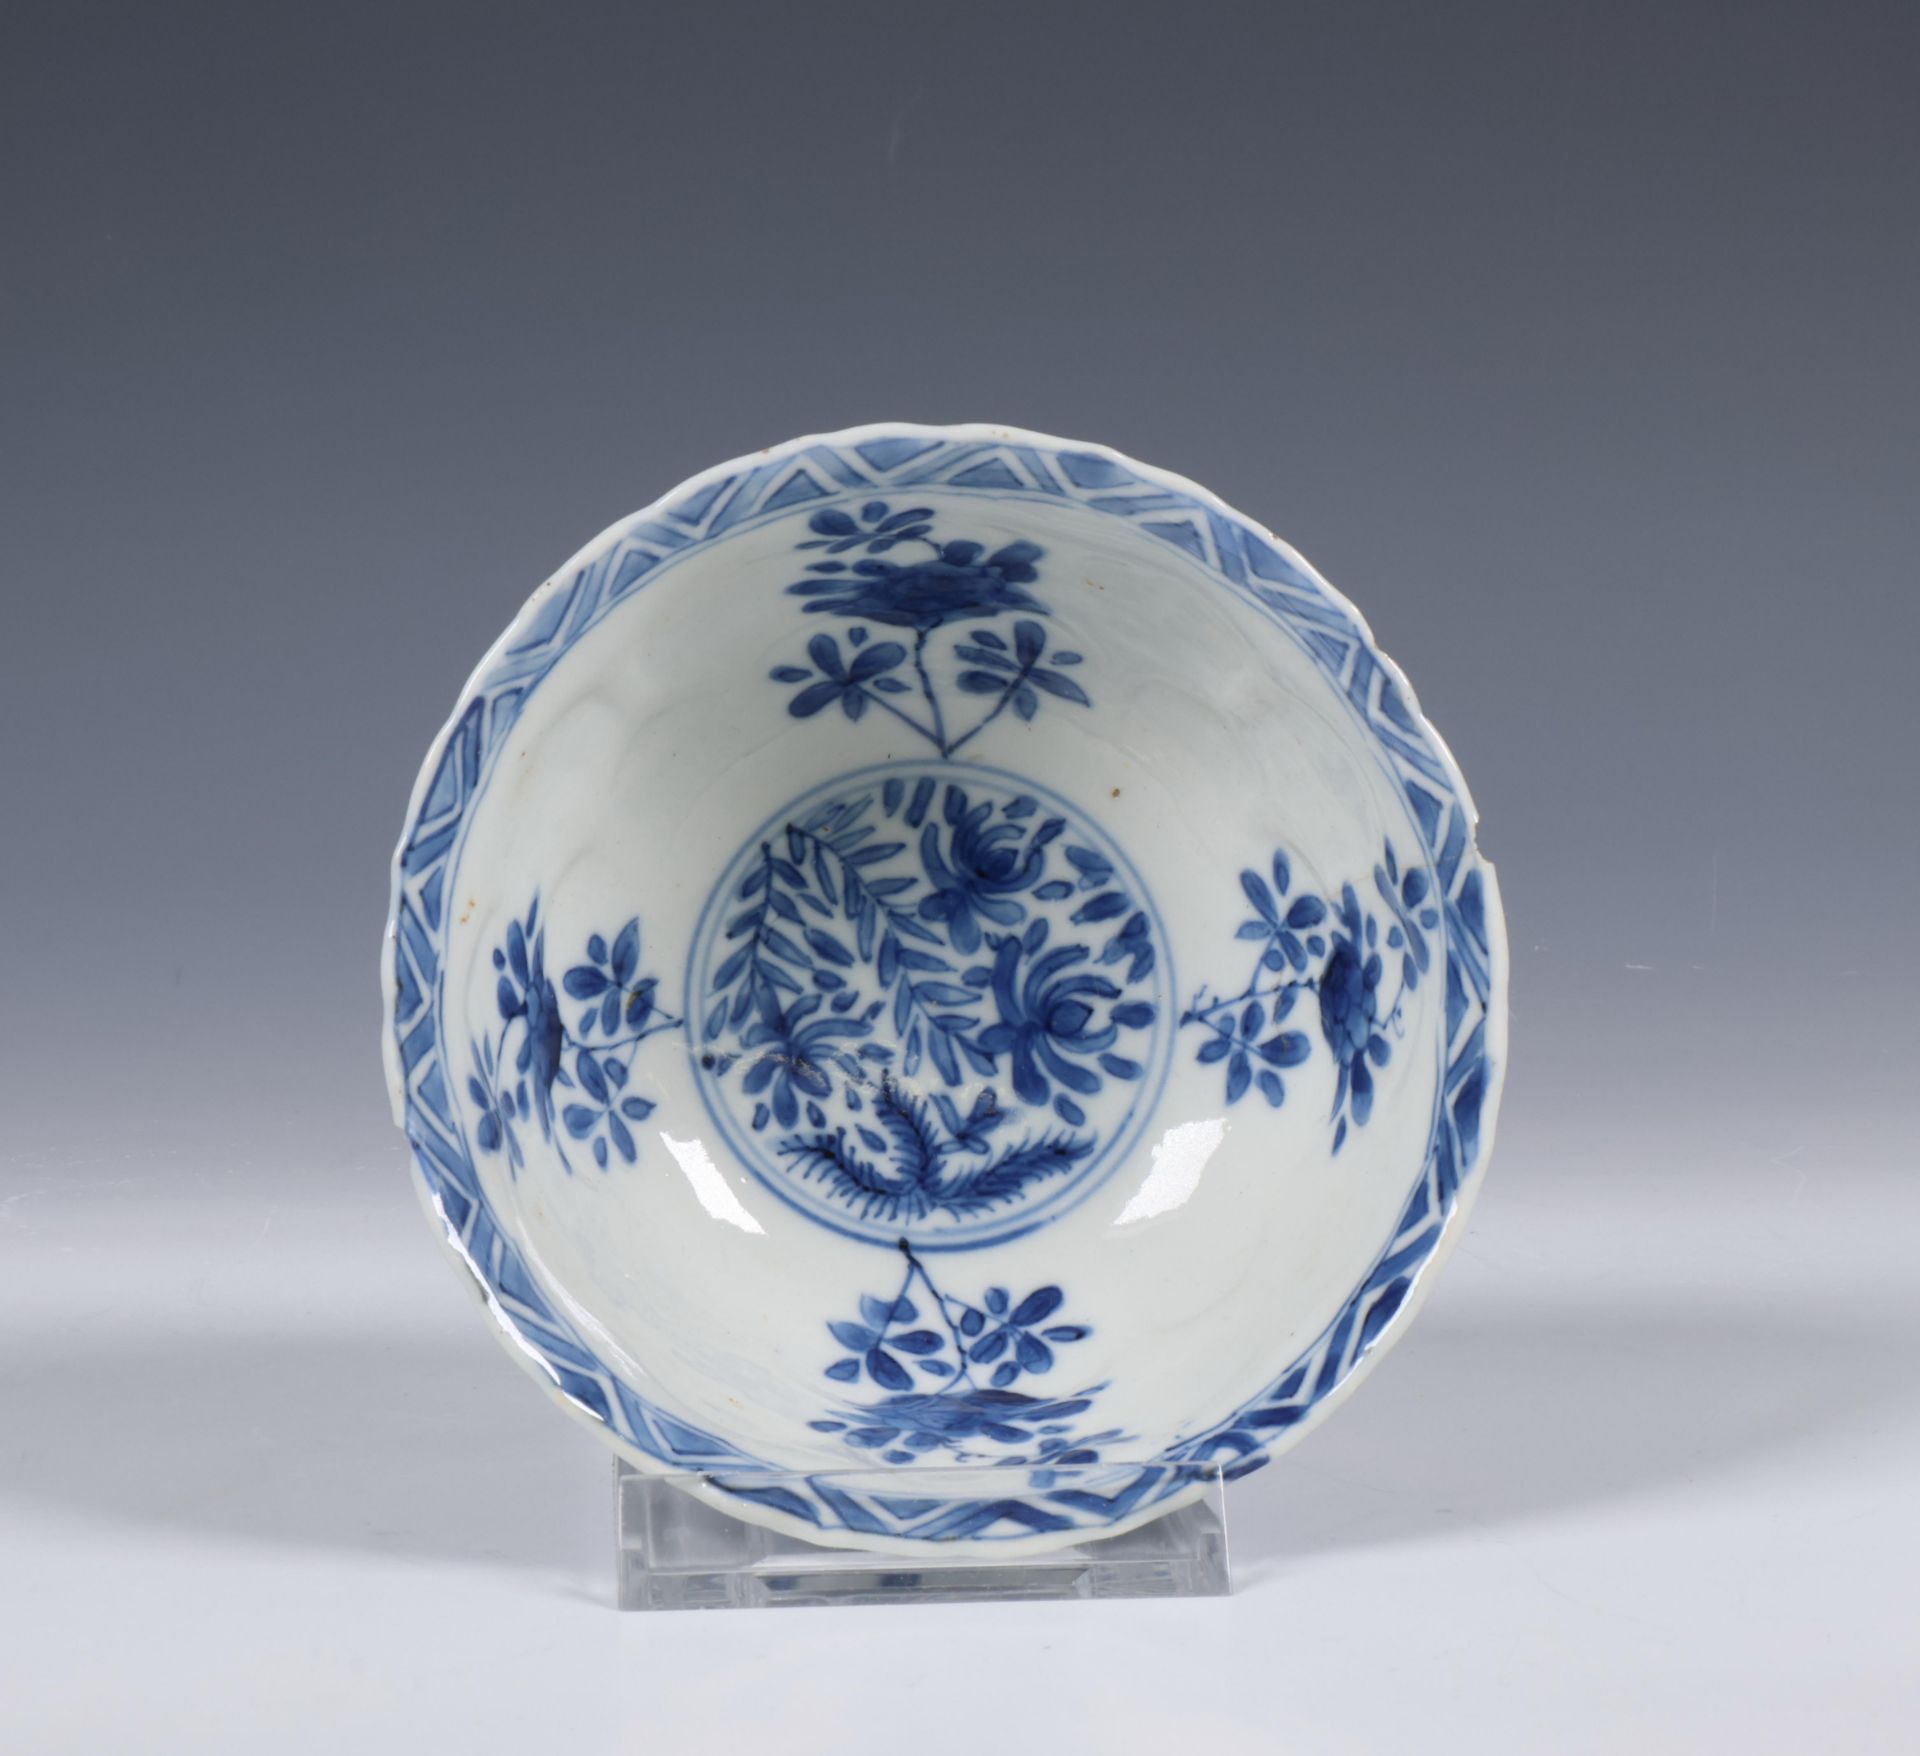 China, blue and white porcelain floral bowl, Kangxi period (1662-1722), - Image 3 of 5